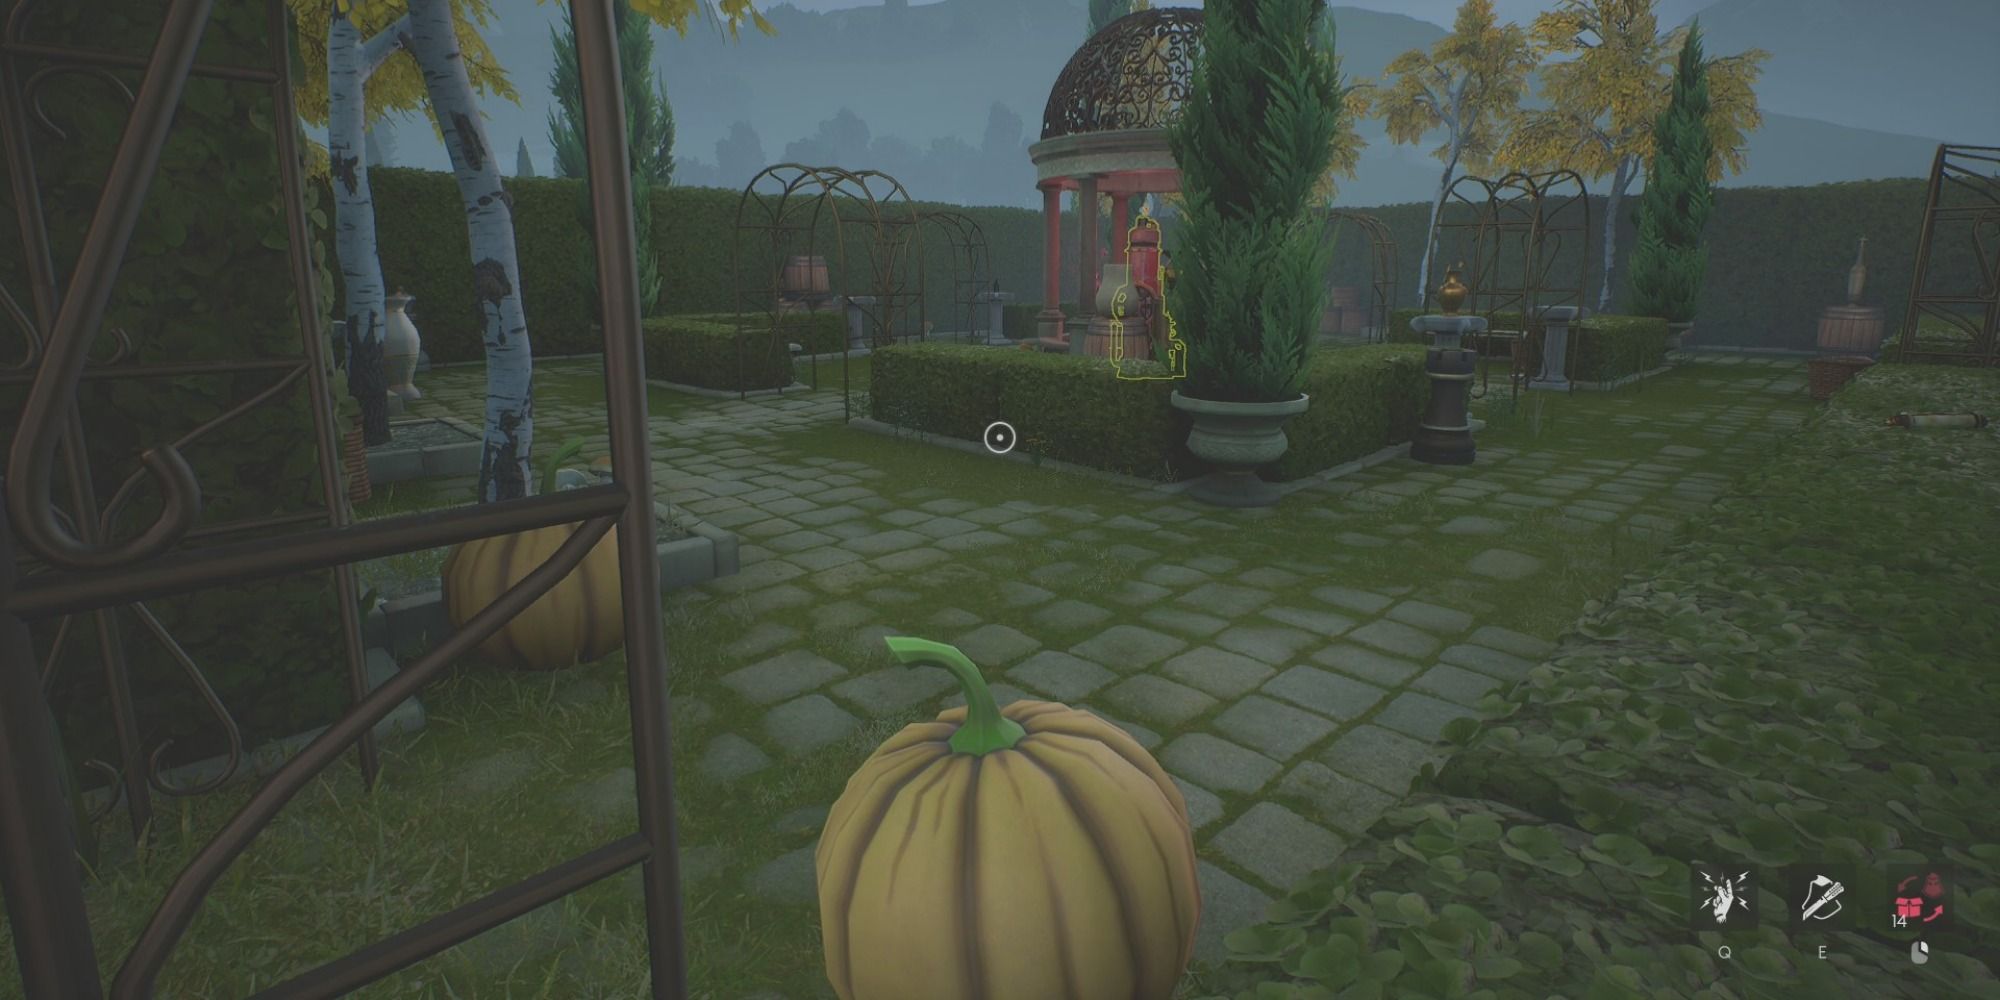 The imposter disguises himself as a pumpkin in the Abbey courtyard